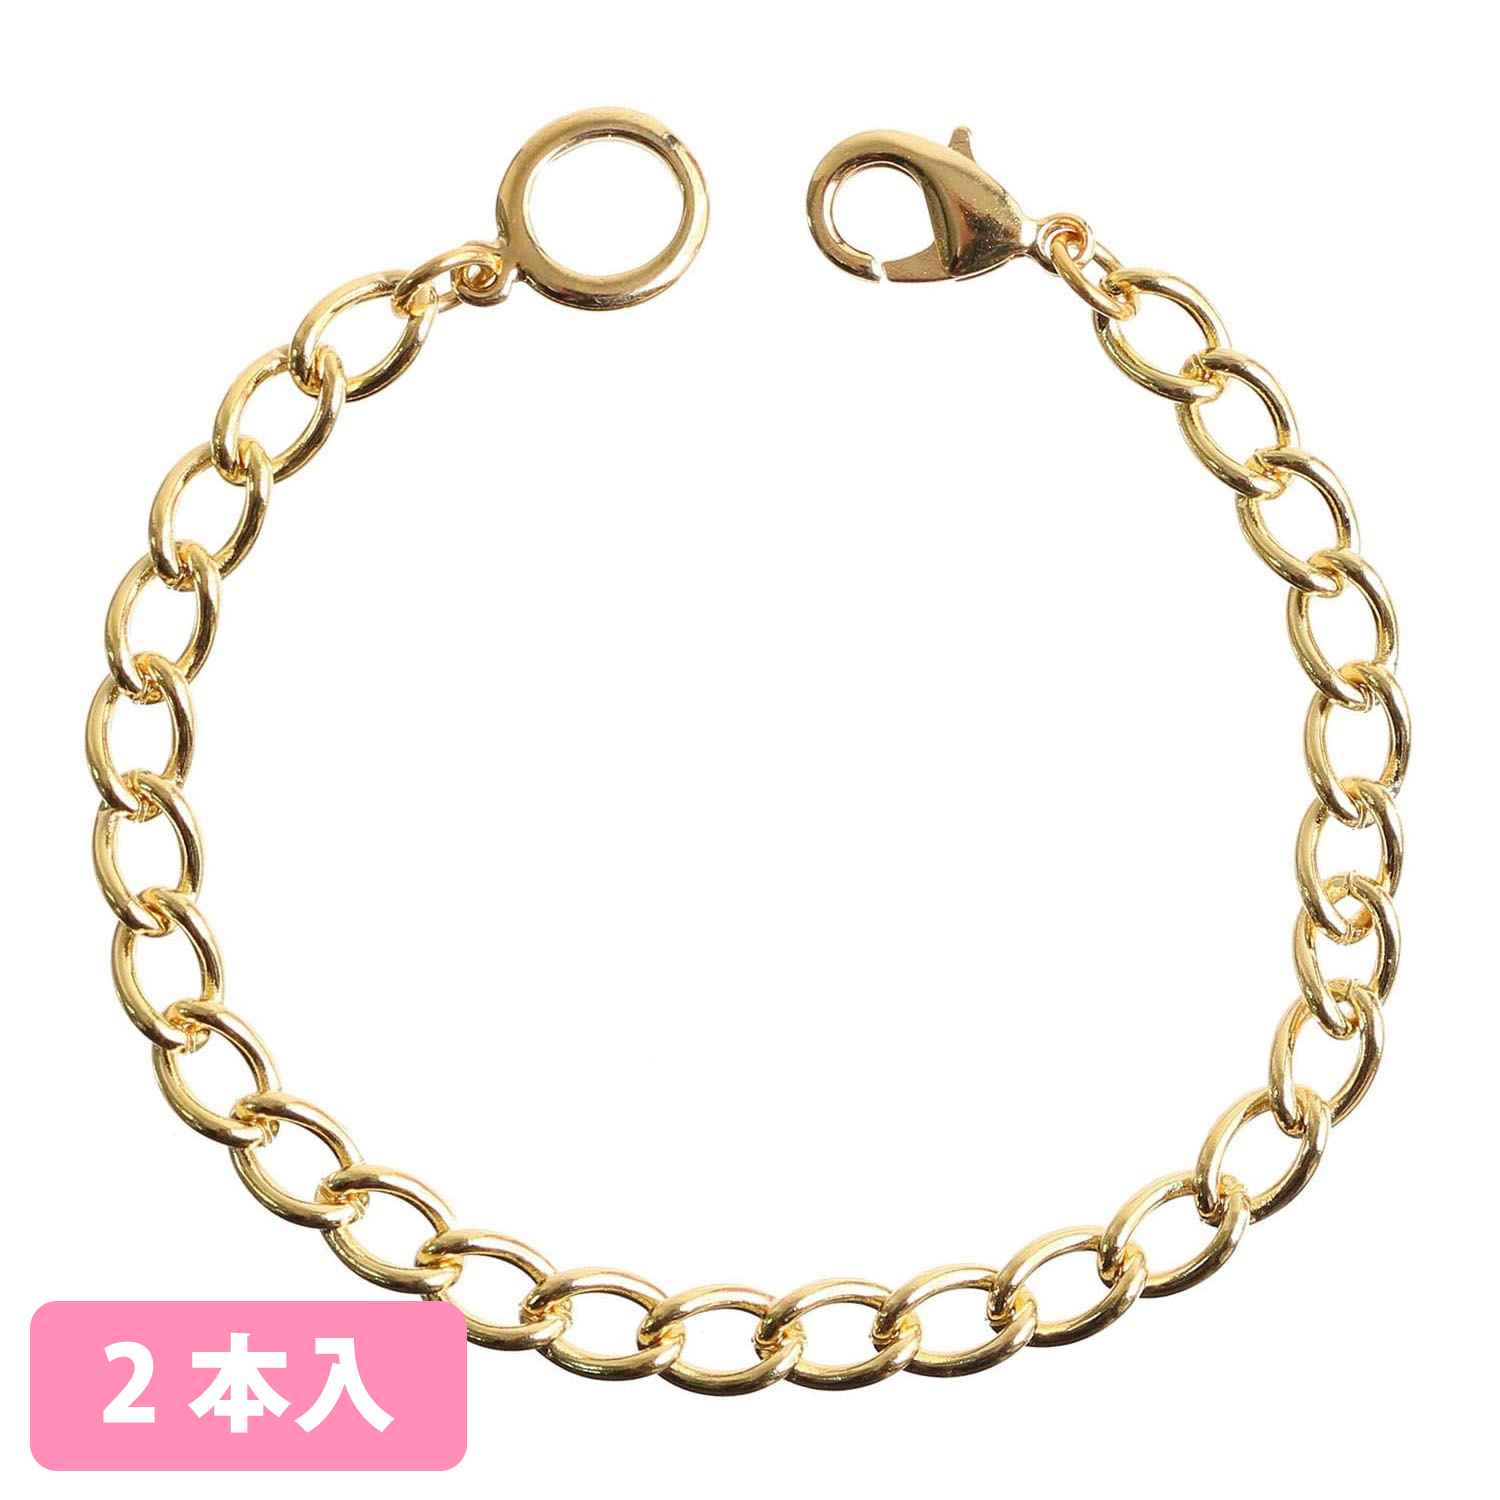 A8-65~69 Chains for Bag Charms Length 20cm 2pcs (pack)